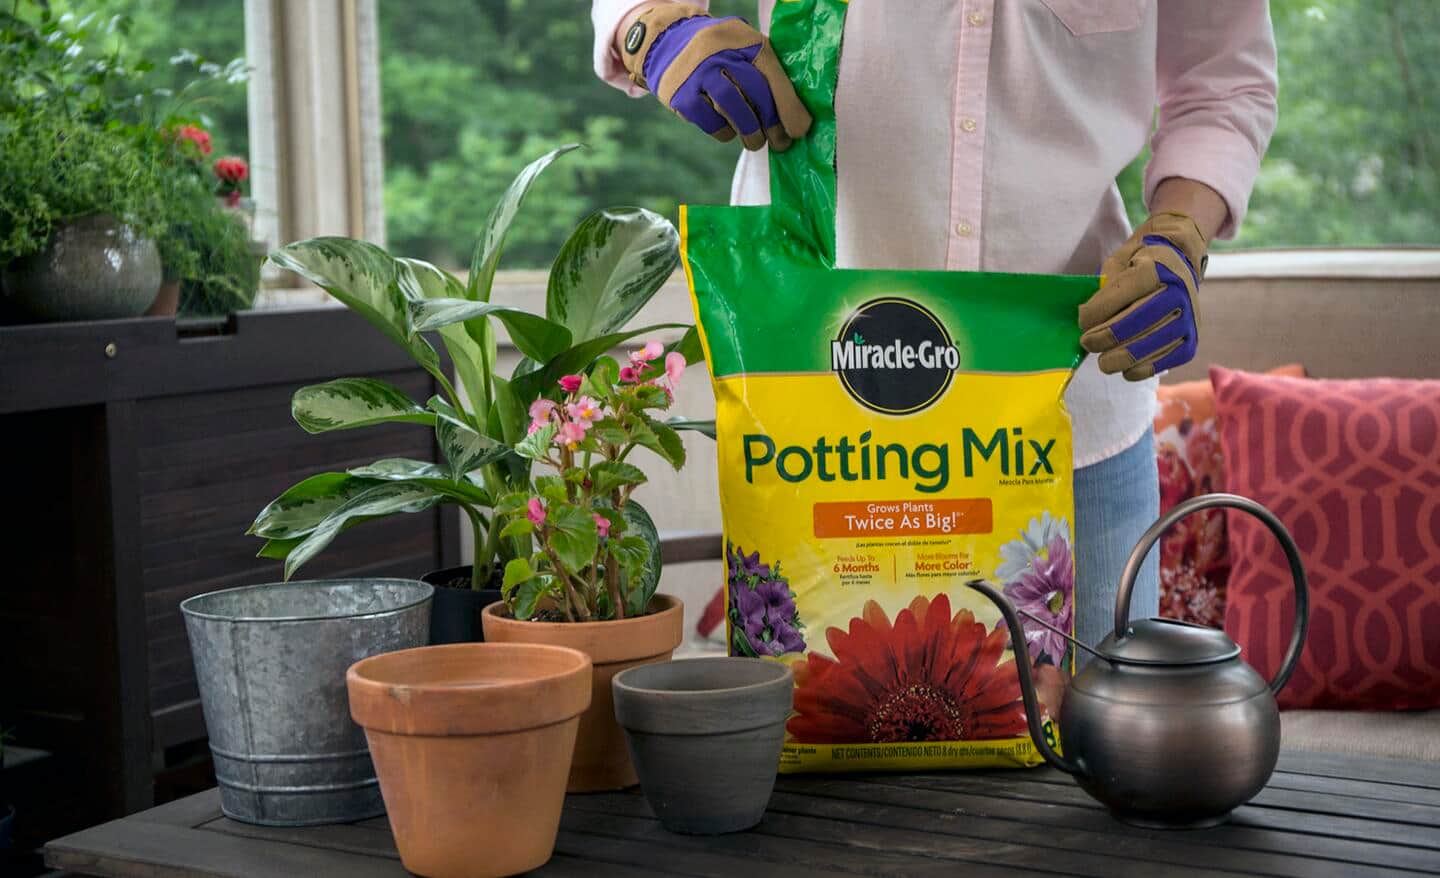 A bag of potting mix sits next to some plants and pots.